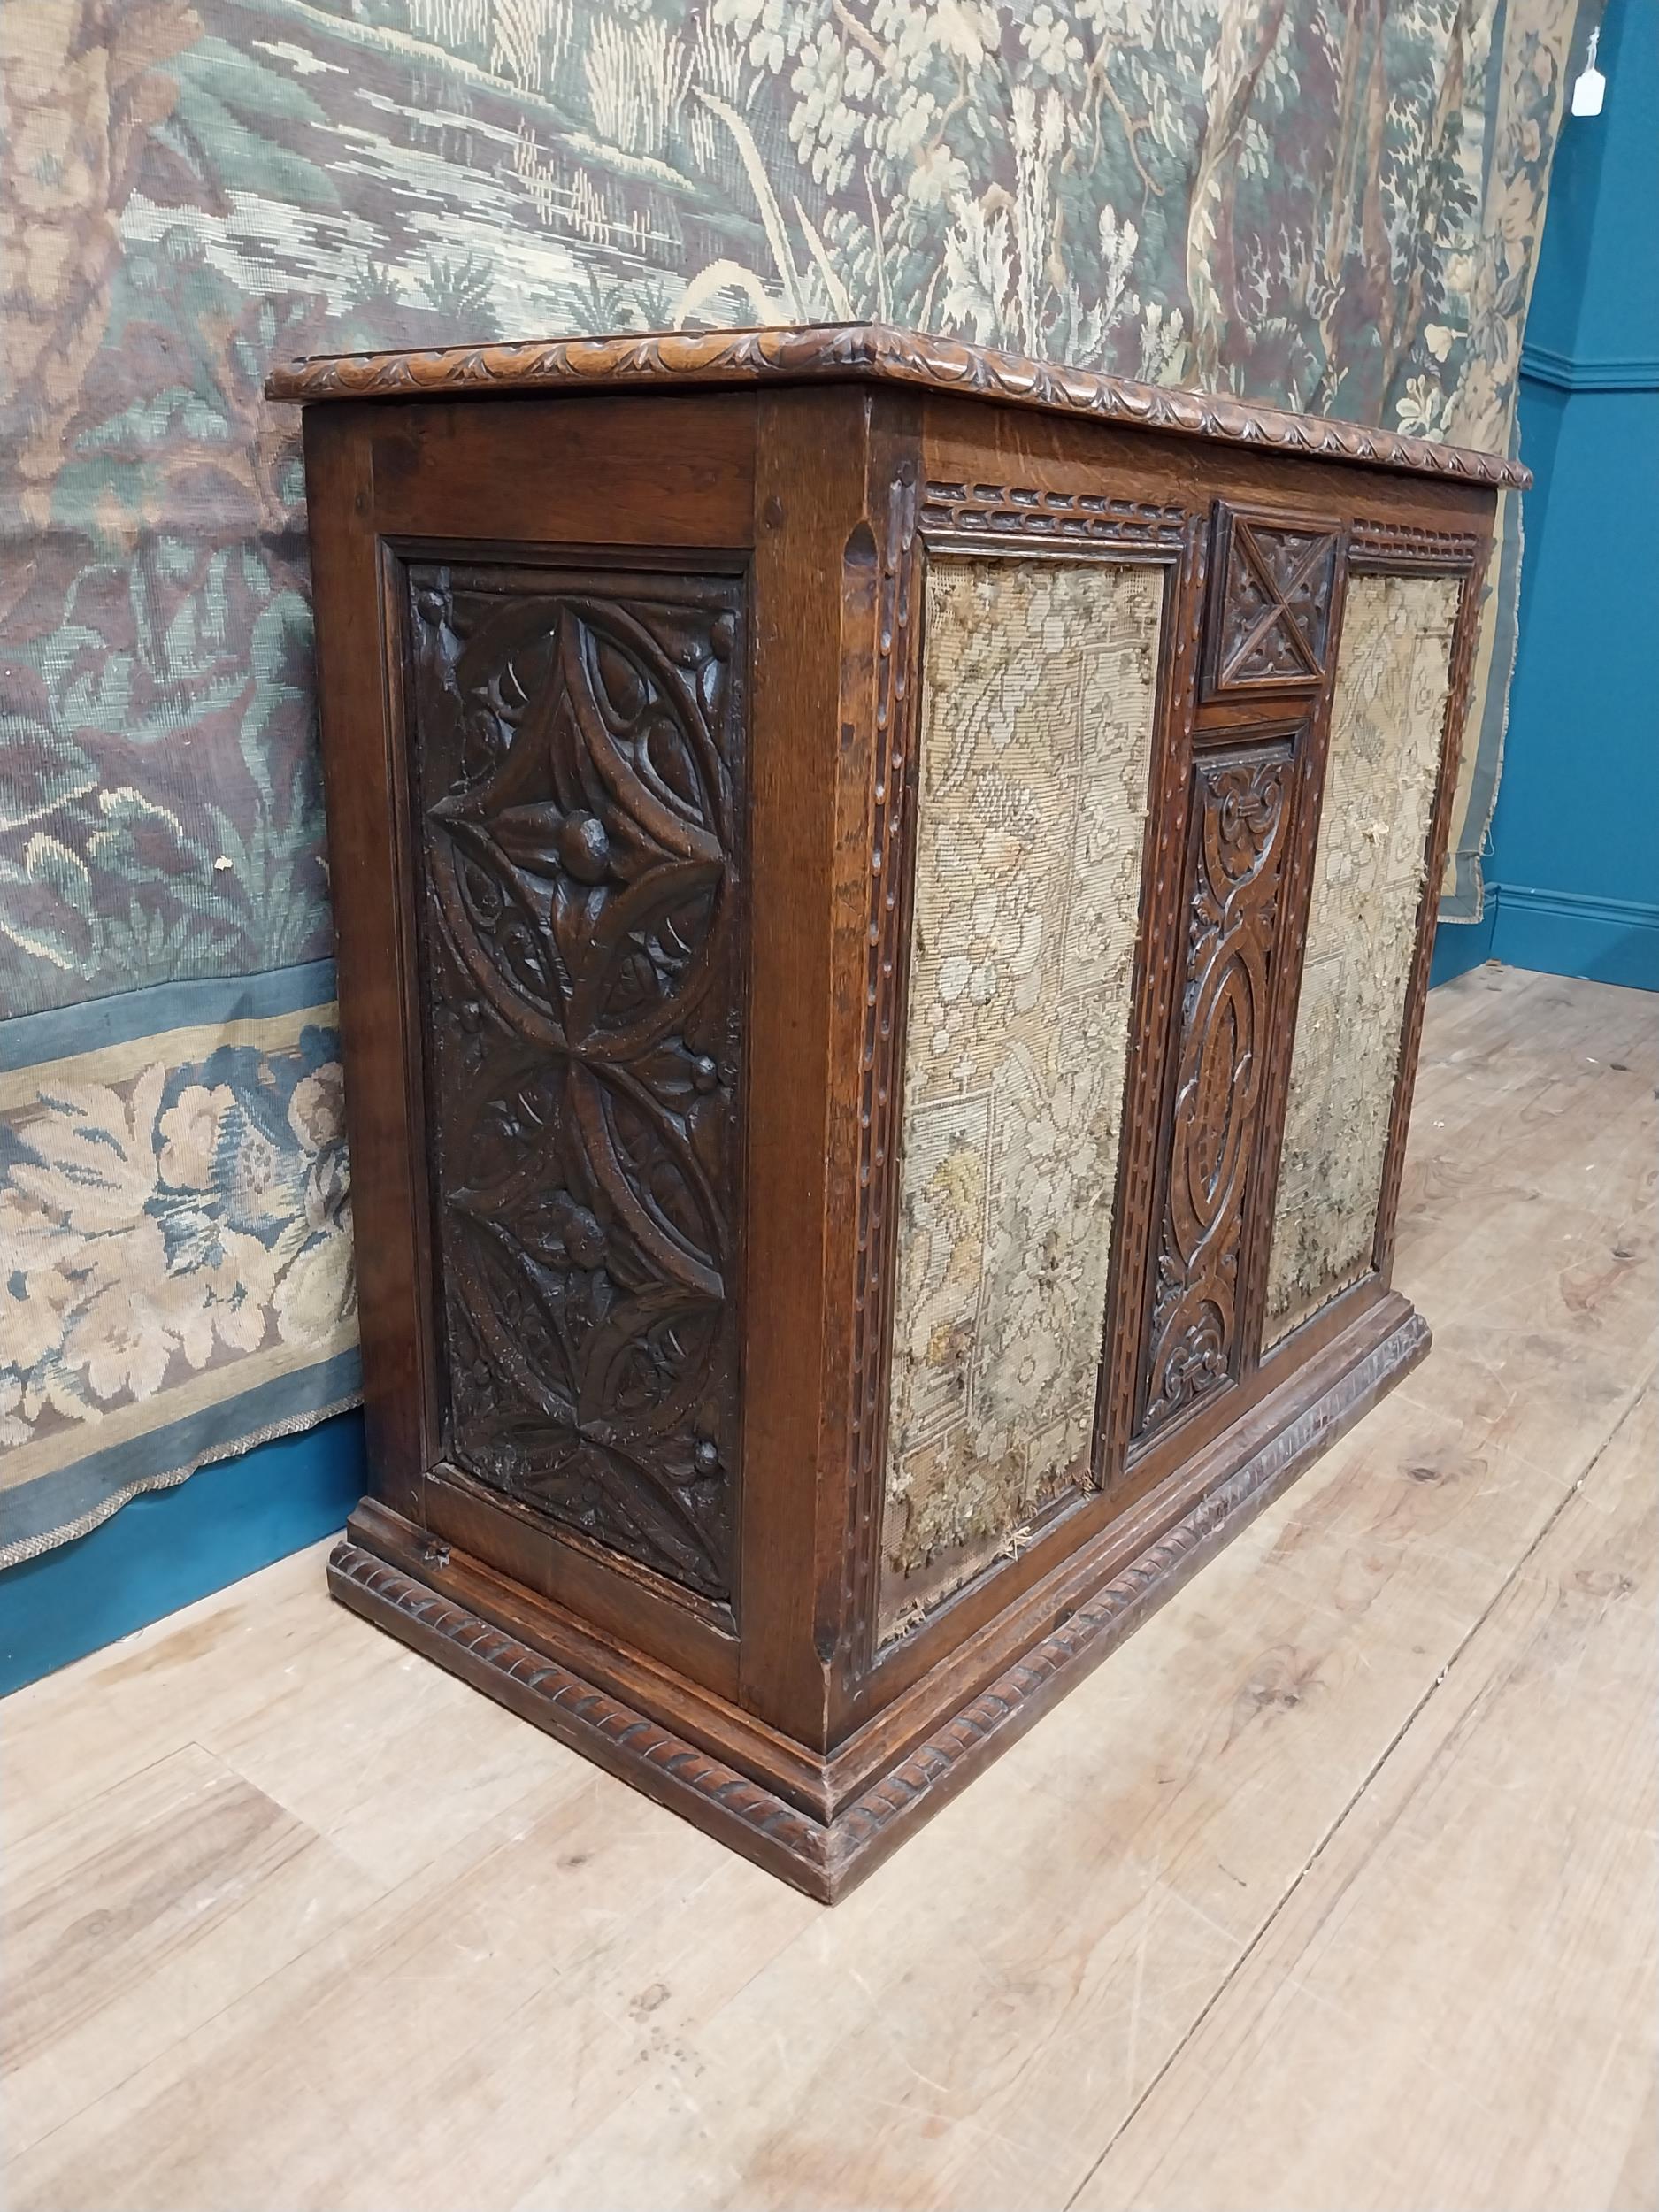 19th C. carved oak blanket box with tapestry panels {75 cm H x 85 cm W x 44 cm D}. - Image 4 of 8